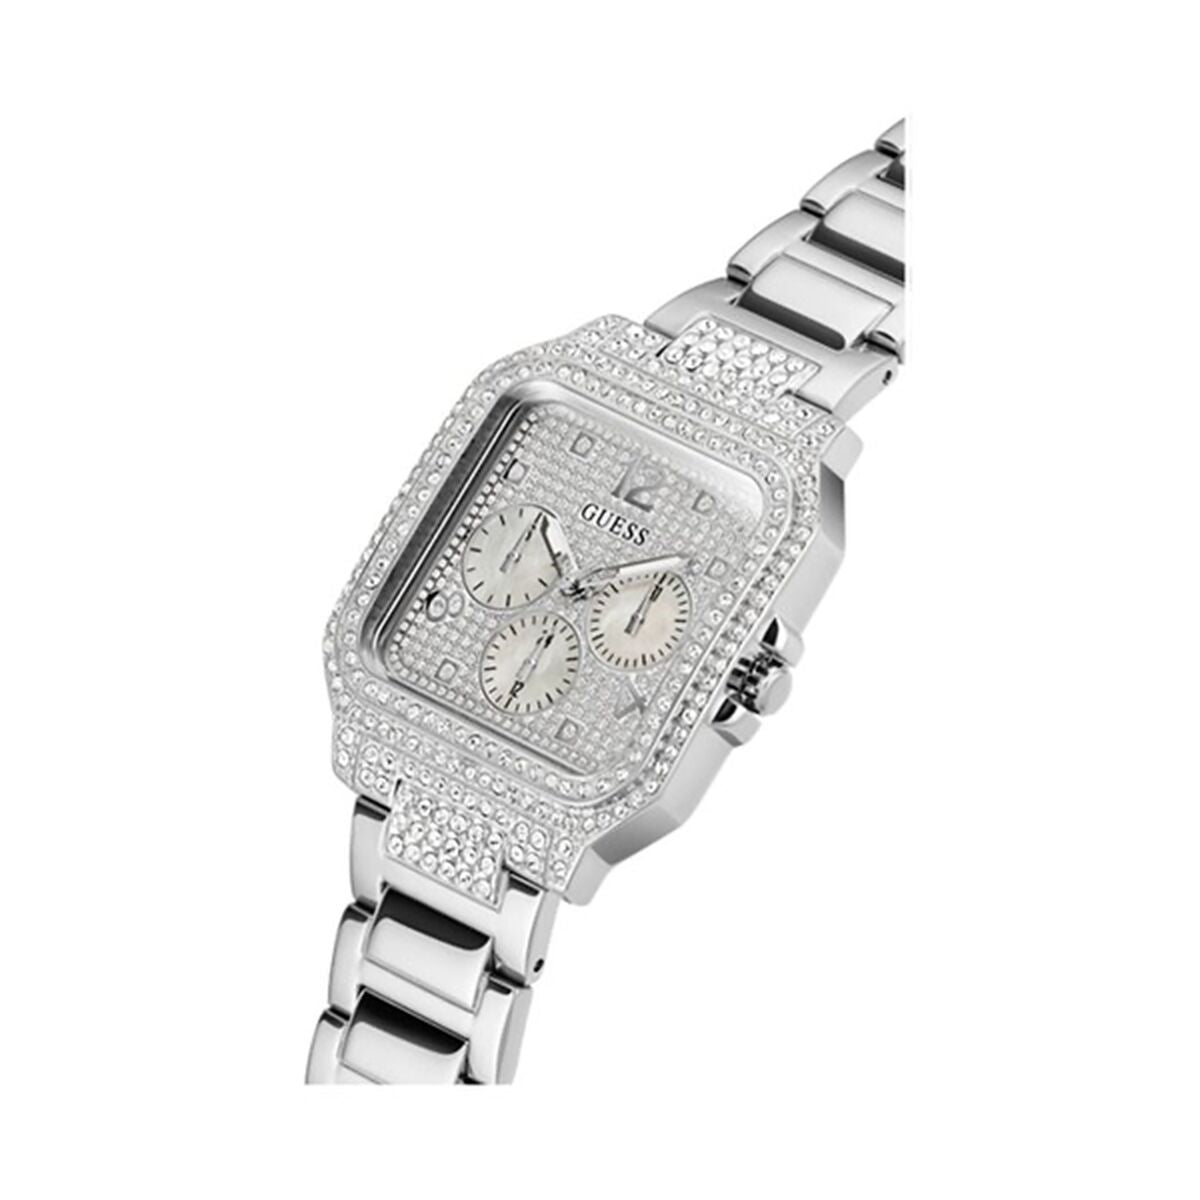 Ladies' Watch Guess GW0472L1 (Ø 35 mm), Guess, Watches, Women, ladies-watch-guess-gw0472l1-o-35-mm, Brand_Guess, category-reference-2570, category-reference-2635, category-reference-2995, category-reference-t-19667, category-reference-t-19725, category-reference-t-20352, Condition_NEW, fashion, original gifts, Price_100 - 200, RiotNook